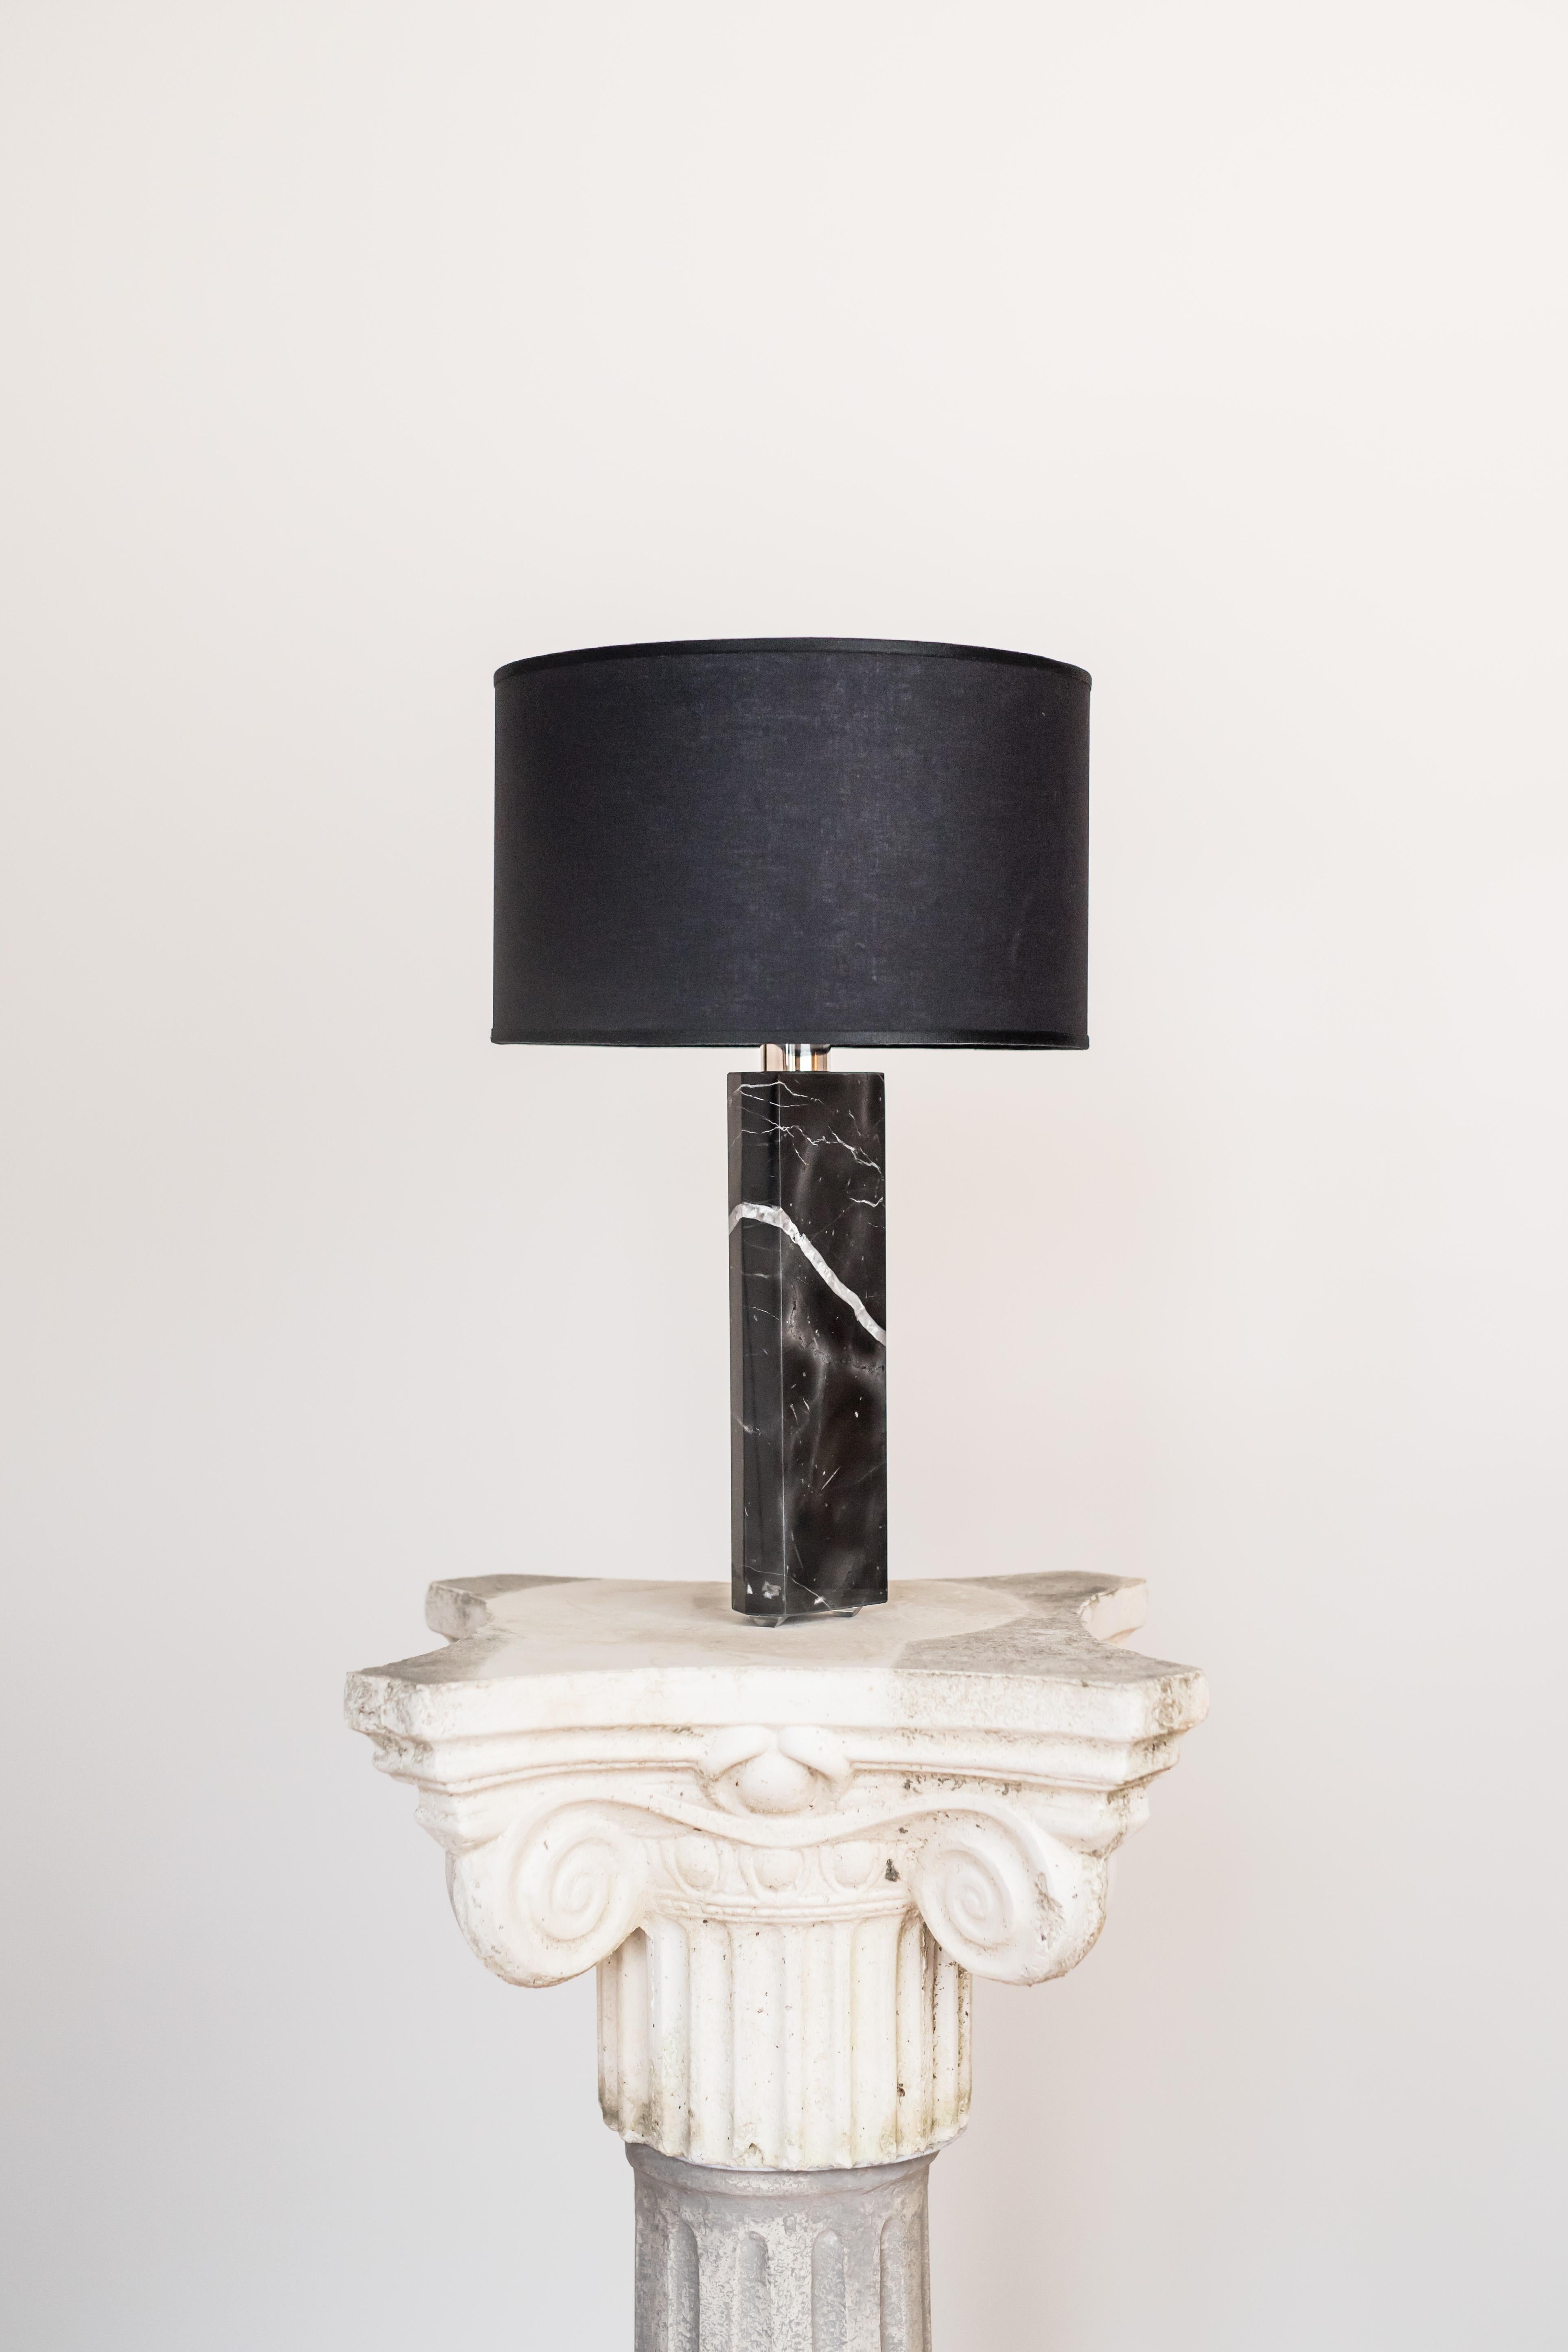 Black marble sculpted table lamp by brajak vitberg
Materials: black marble, white or black cotton lampshade, cotton wiring
Dimensions: 52 x 35 x 35 cm

Bijelic and Brajak are two architects from Ljubljana, Slovenia.
They are striving to design